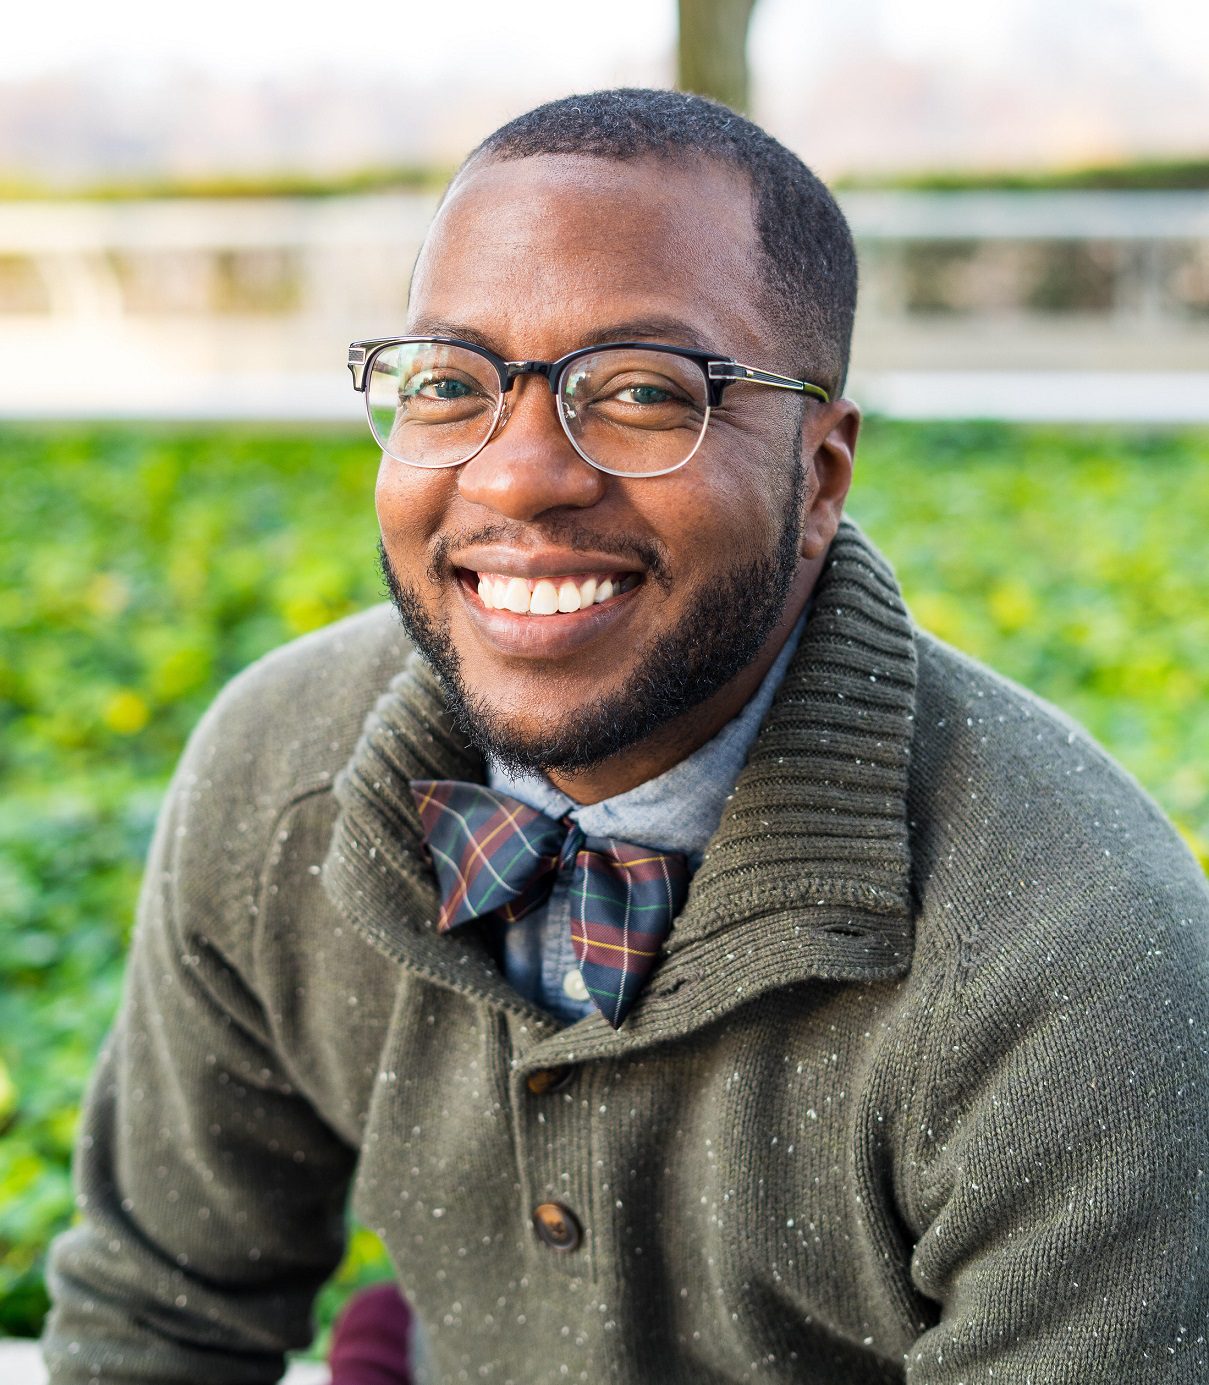 Dr. Melvin Whitehead is an assistant professor of higher education and student affairs at Binghamton University.